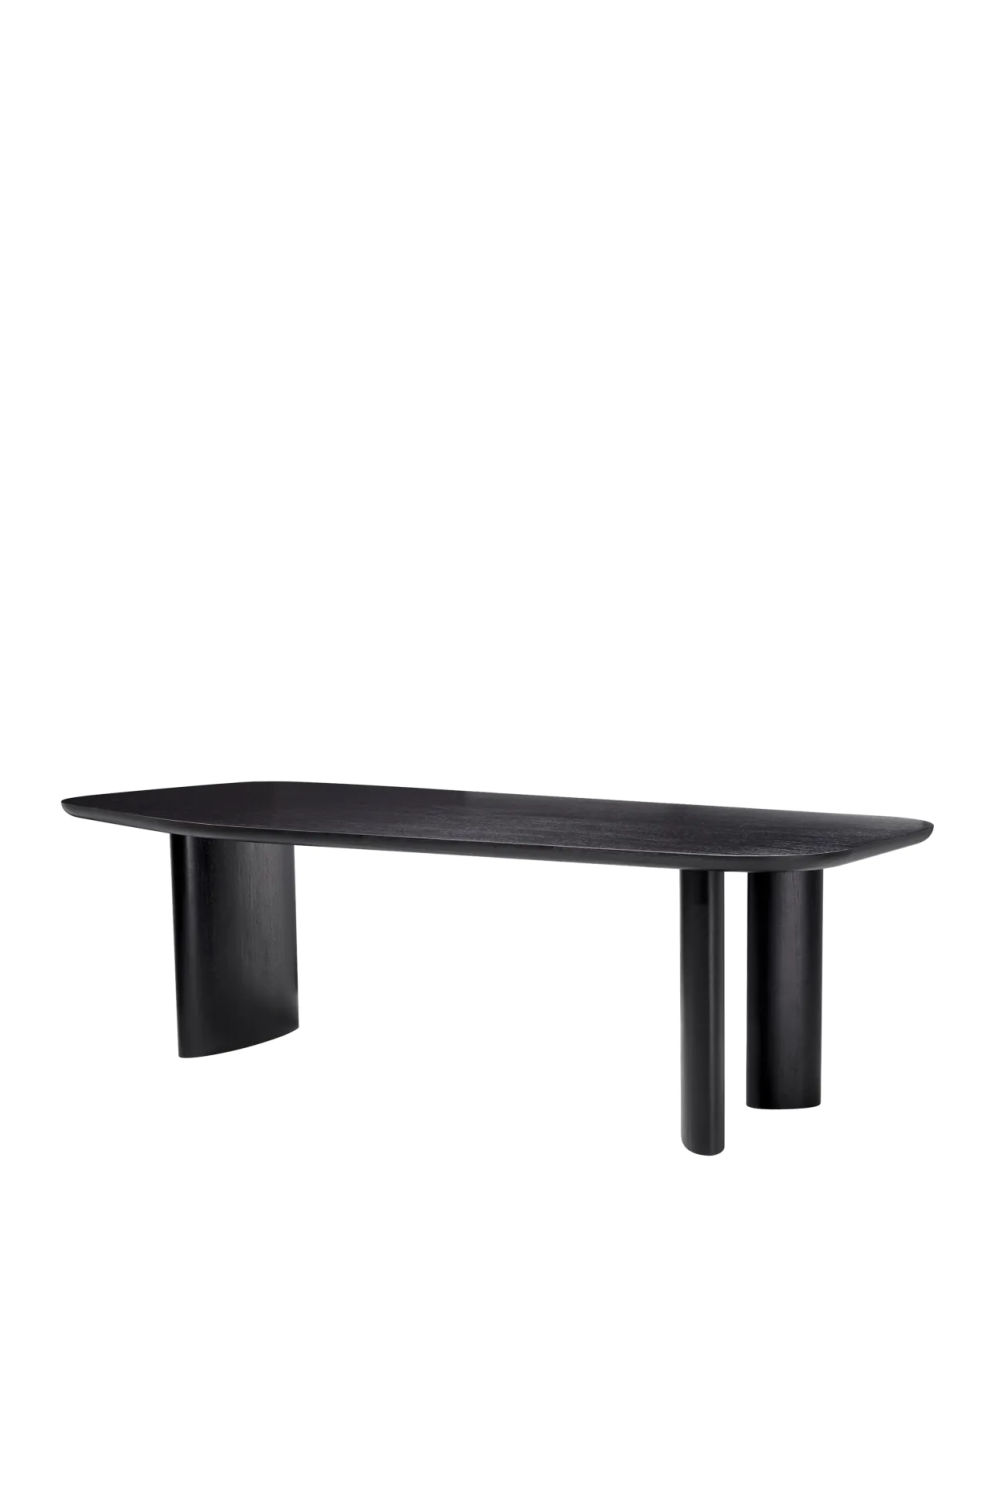 Wooden Free-Form Dining Table | Eichholtz Flemings | Oroa.com